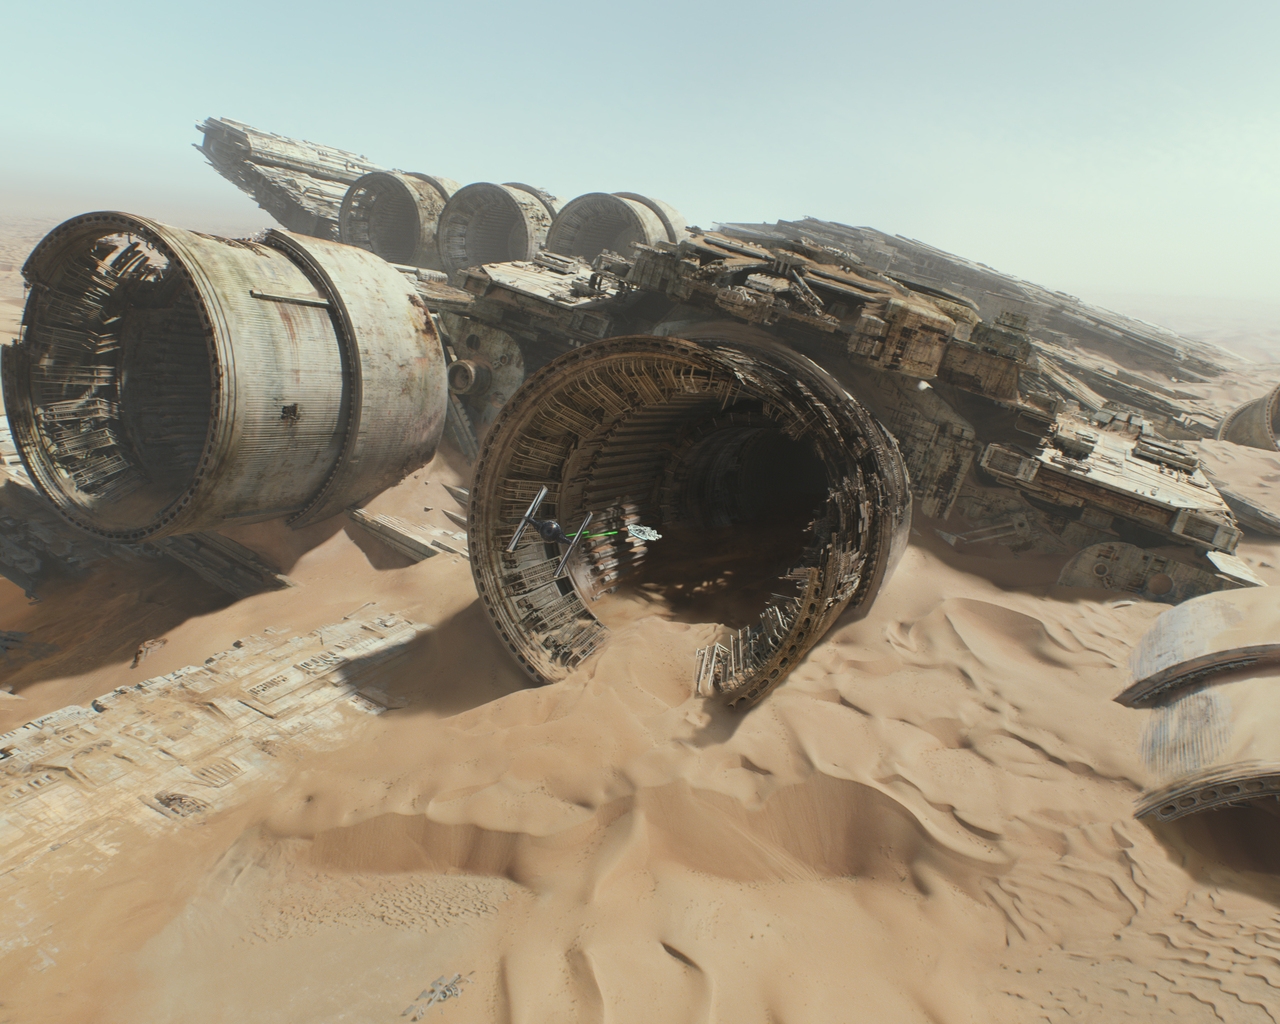 Star Wars The Force Awakens Ship for 1280 x 1024 resolution